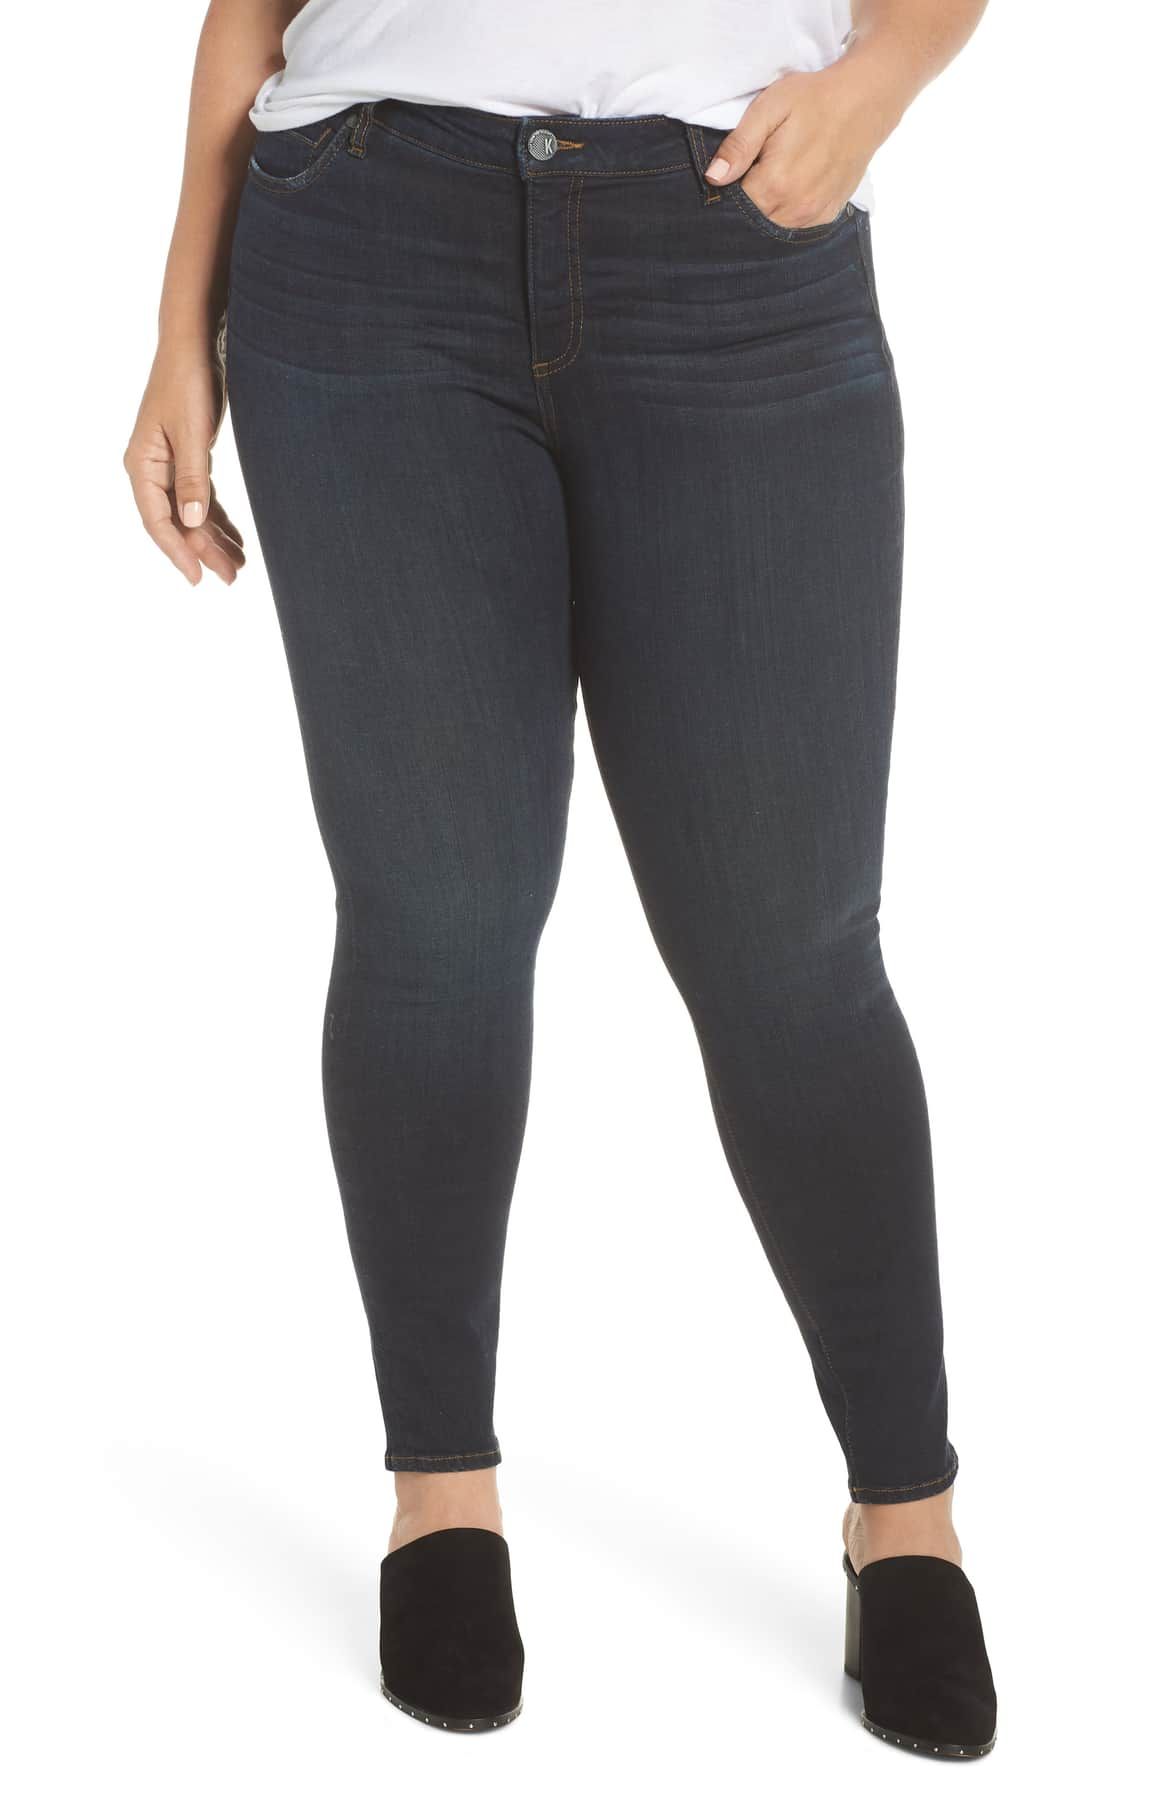 The Best Jeans for Curvy Women | Who What Wear